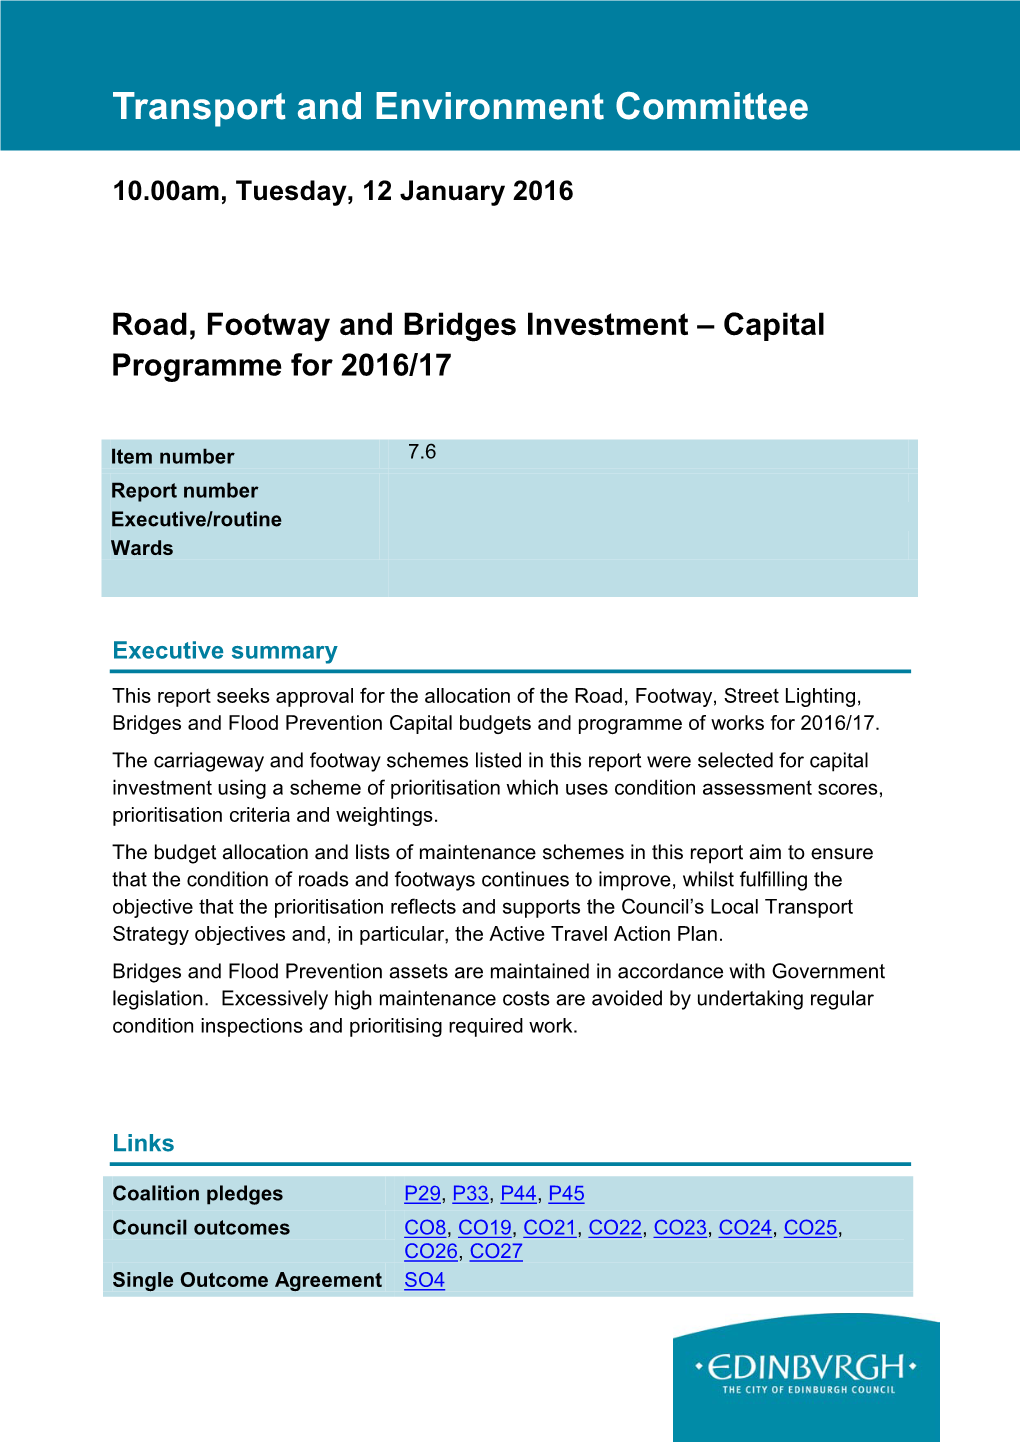 Road, Footway and Bridges Investment – Capital Programme for 2016/17